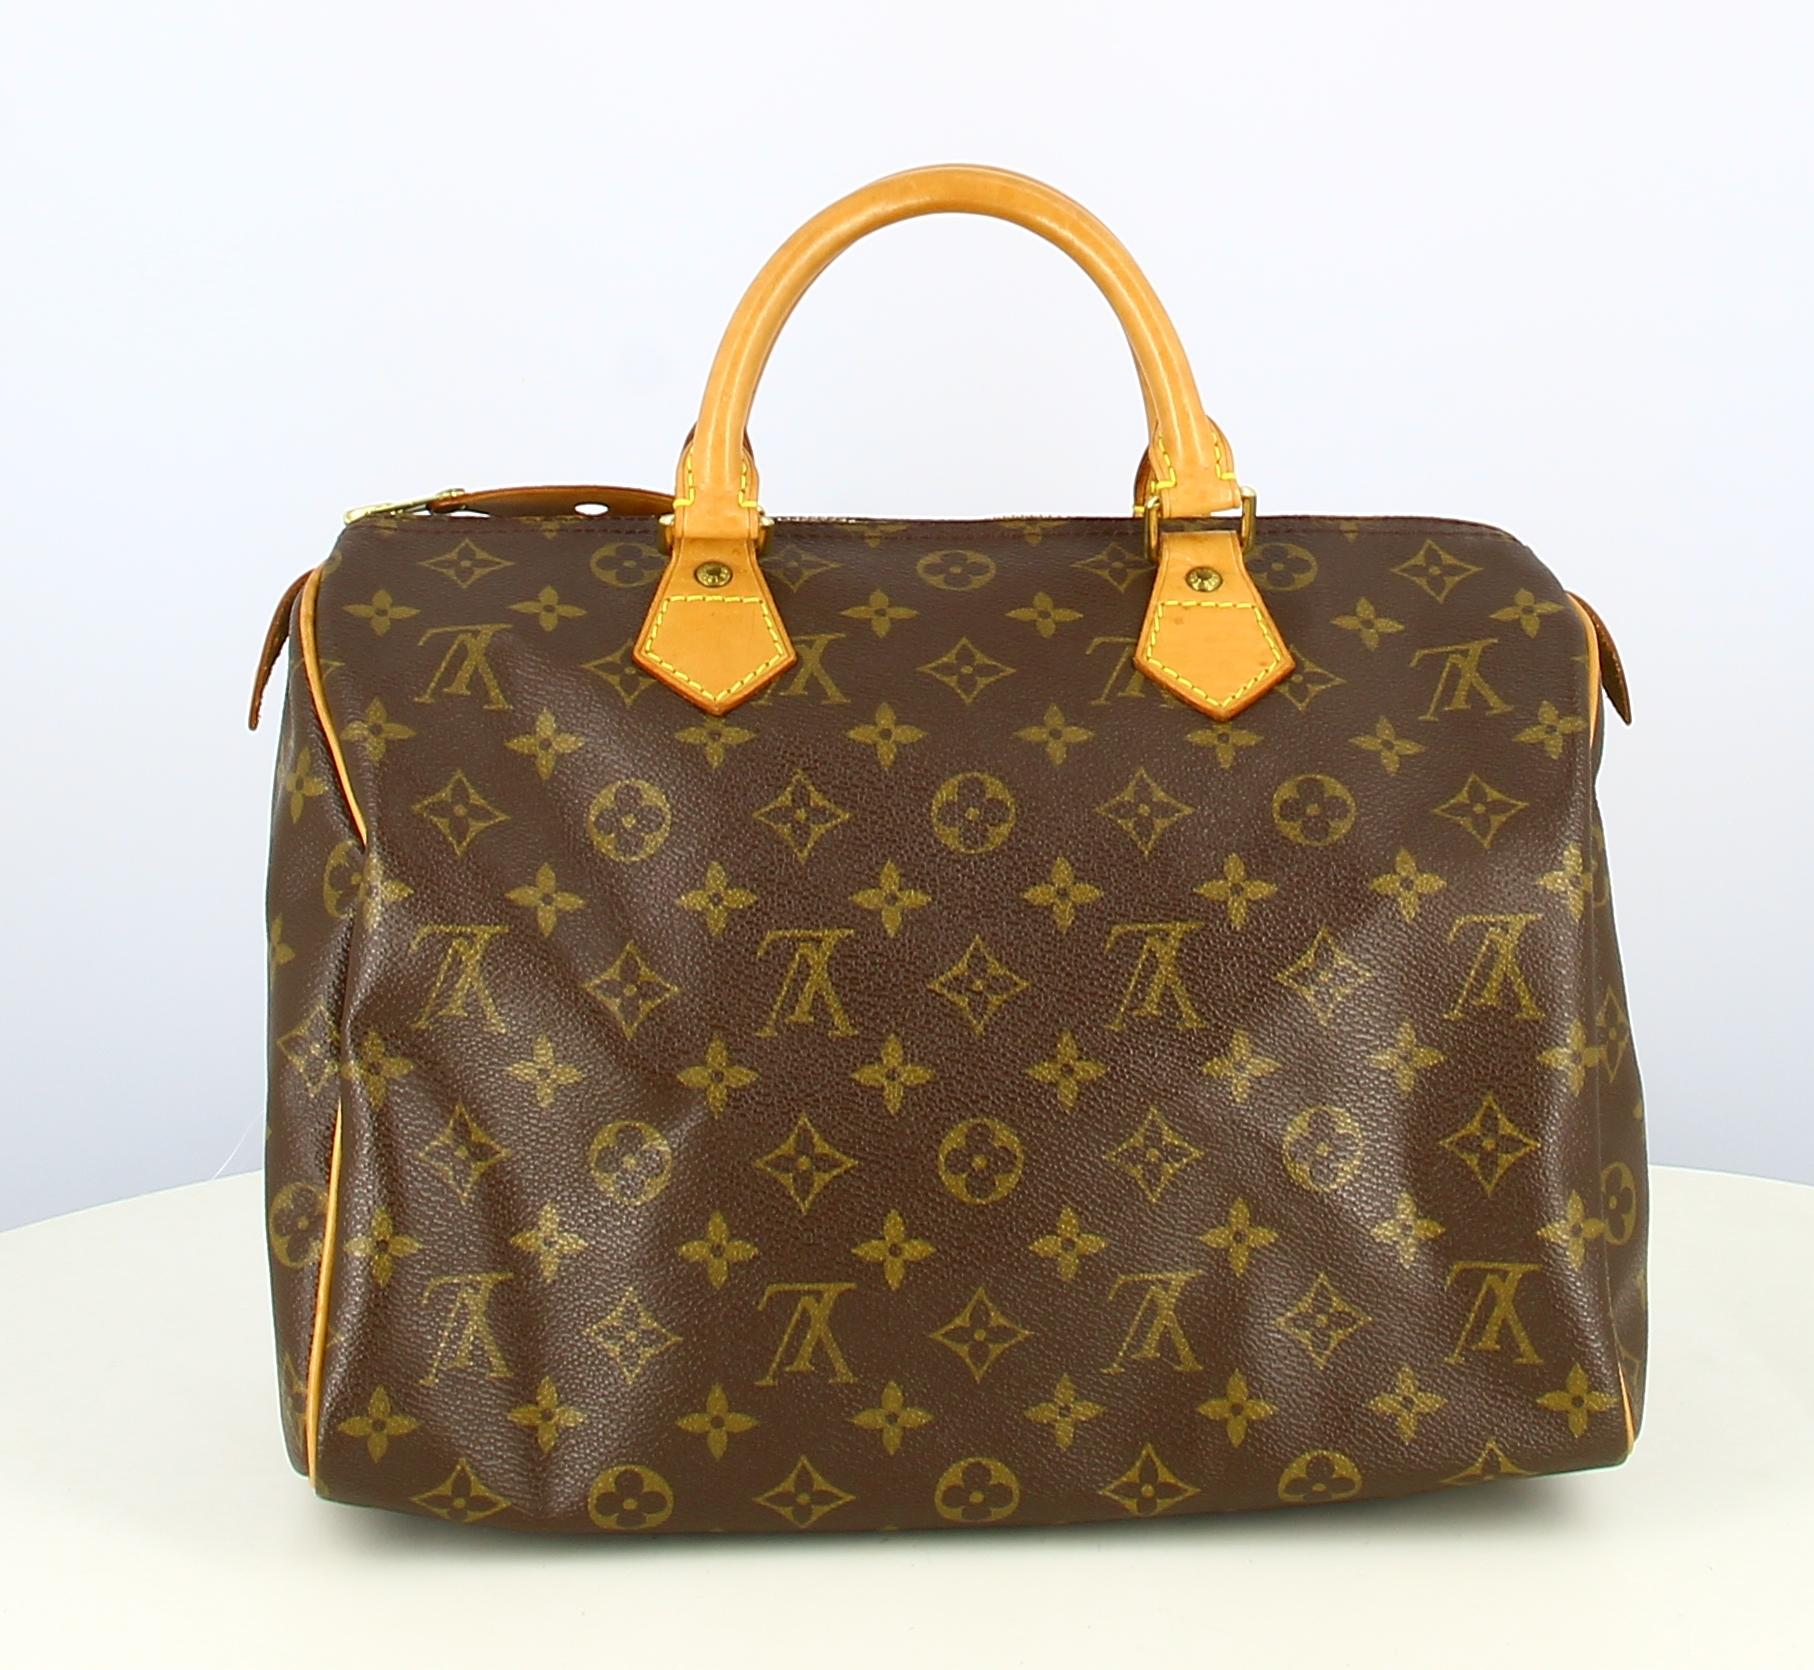 2000 Speedy Louis Vuitton Handbag Monogram Canvas 

- Very good condition. Slight traces of wear with time.
- Louis Vuitton Handbag 
- Speedy. Monogram canvas
- Small brown leather strap 
- Clasp: Golden zip